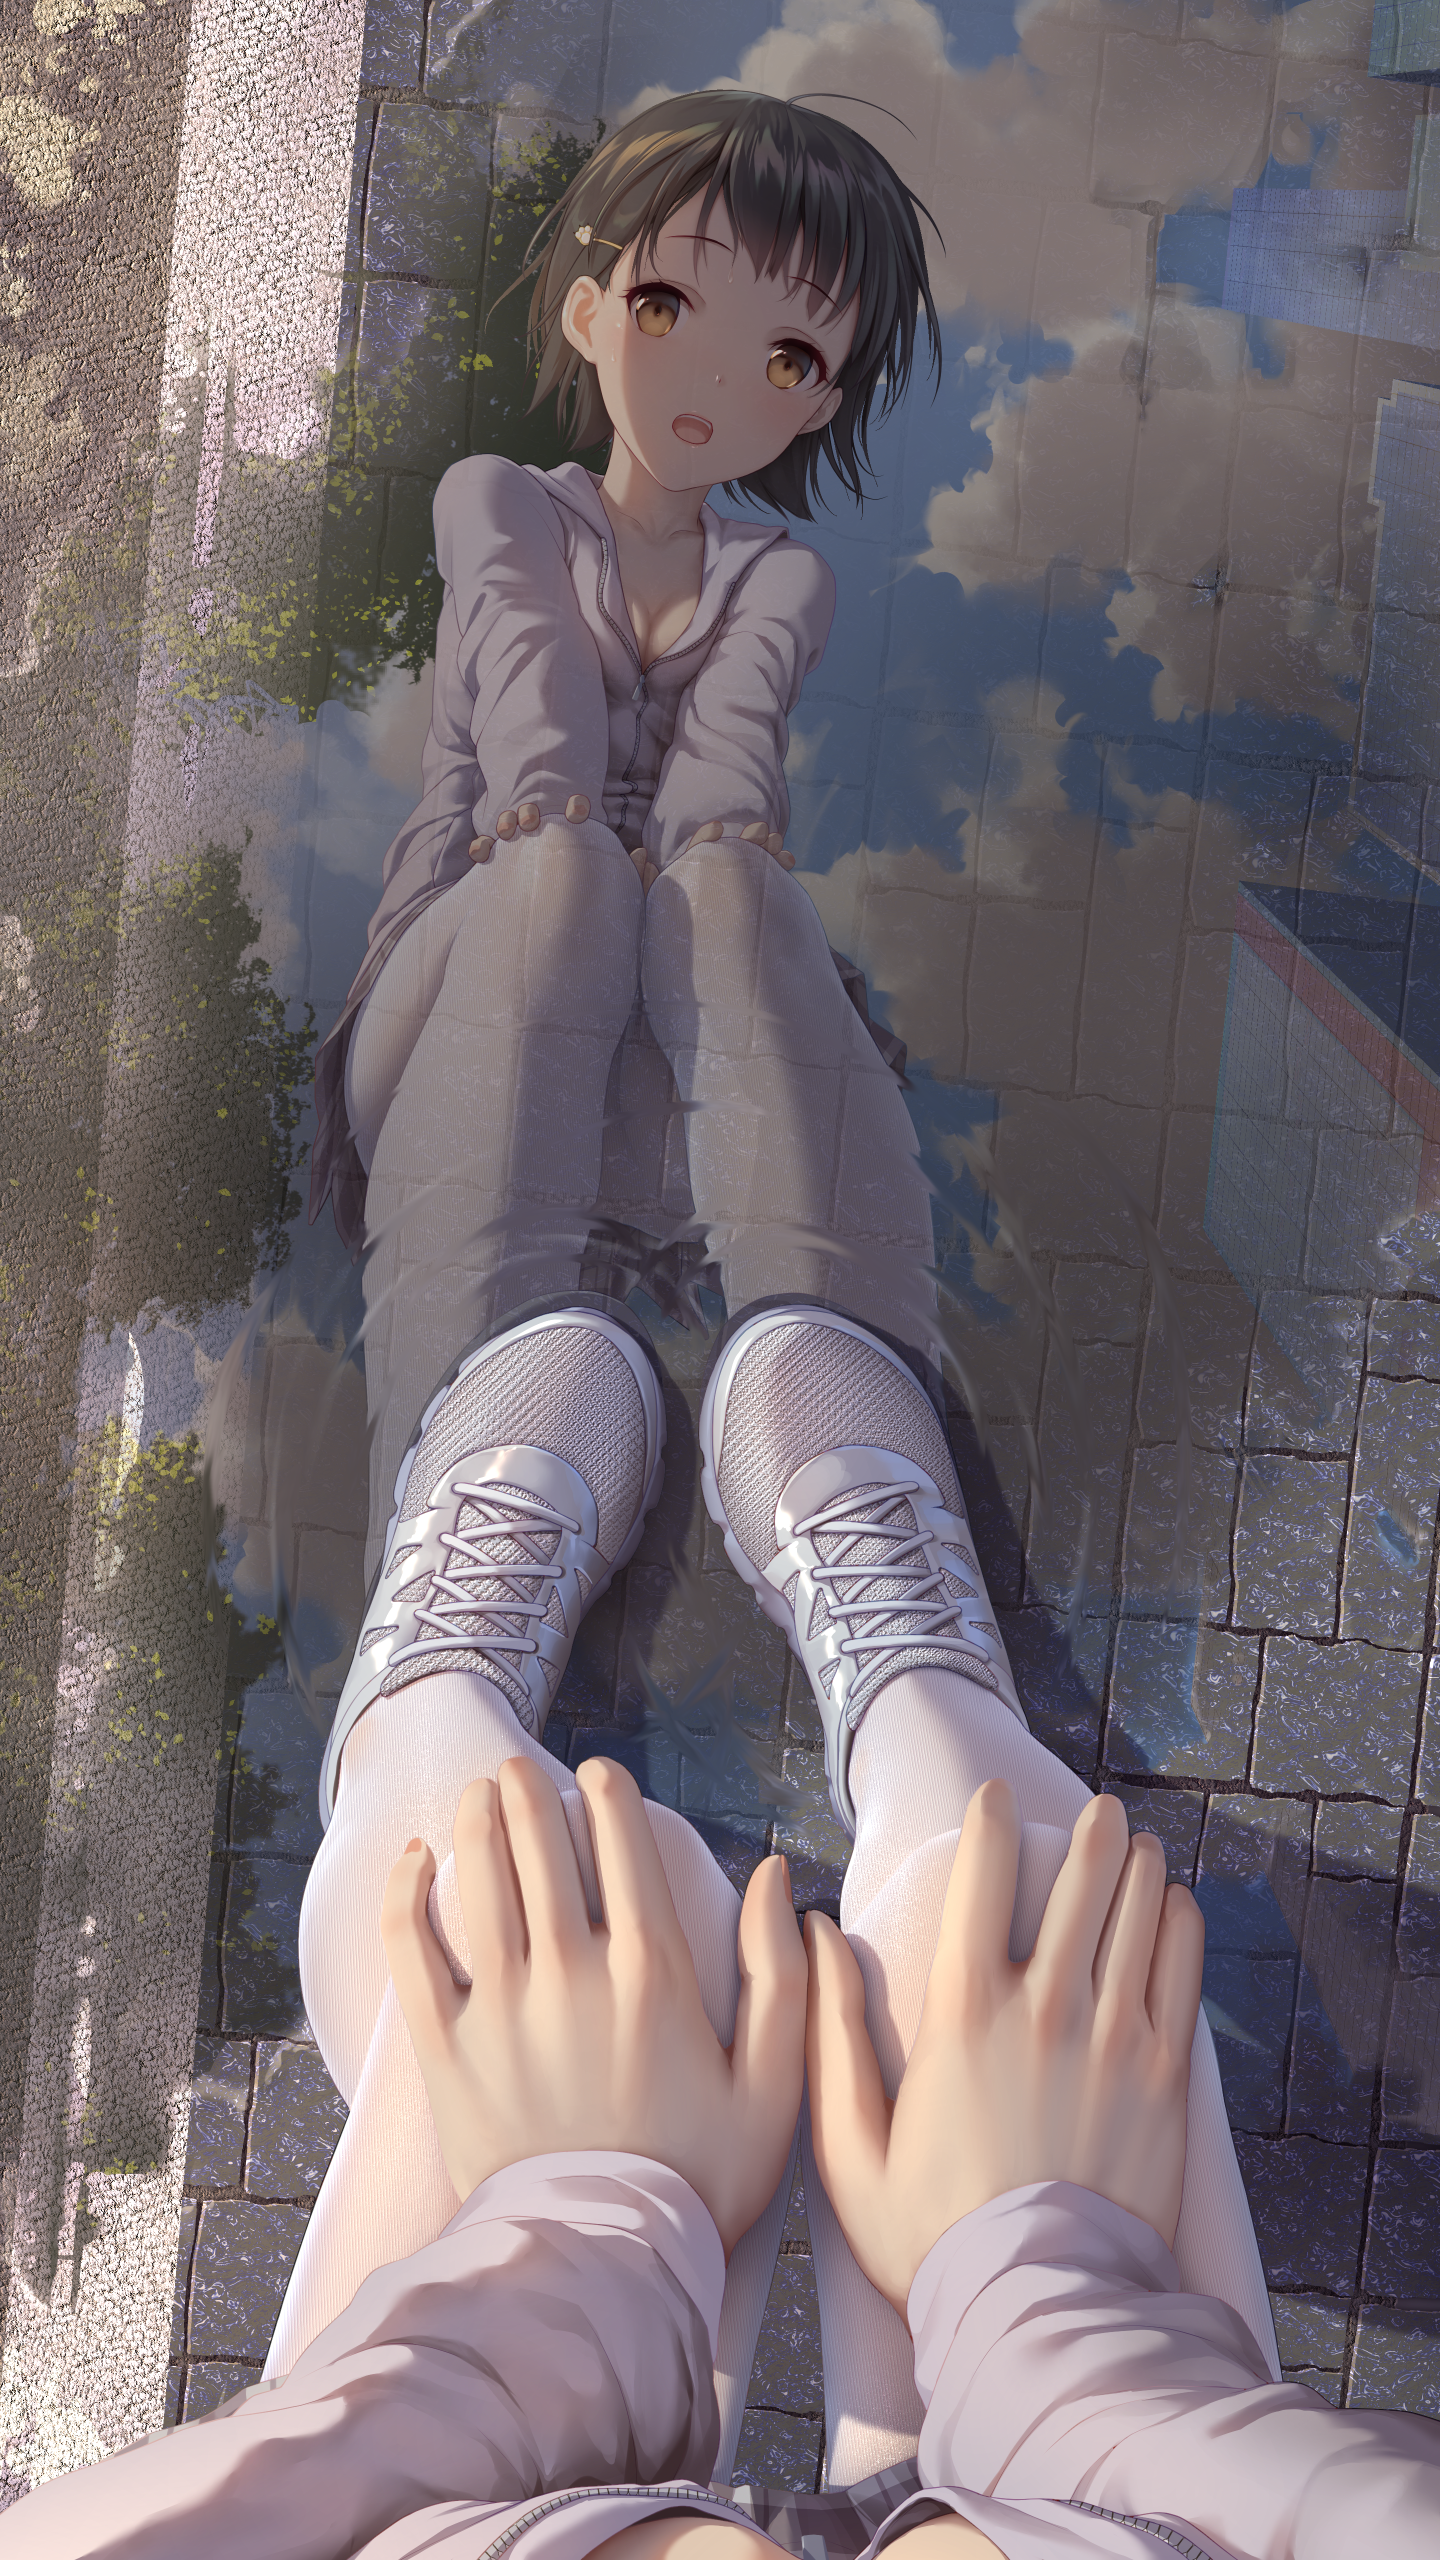 Anime Anime Girls Reflection Water Clouds Ground 1440x2560